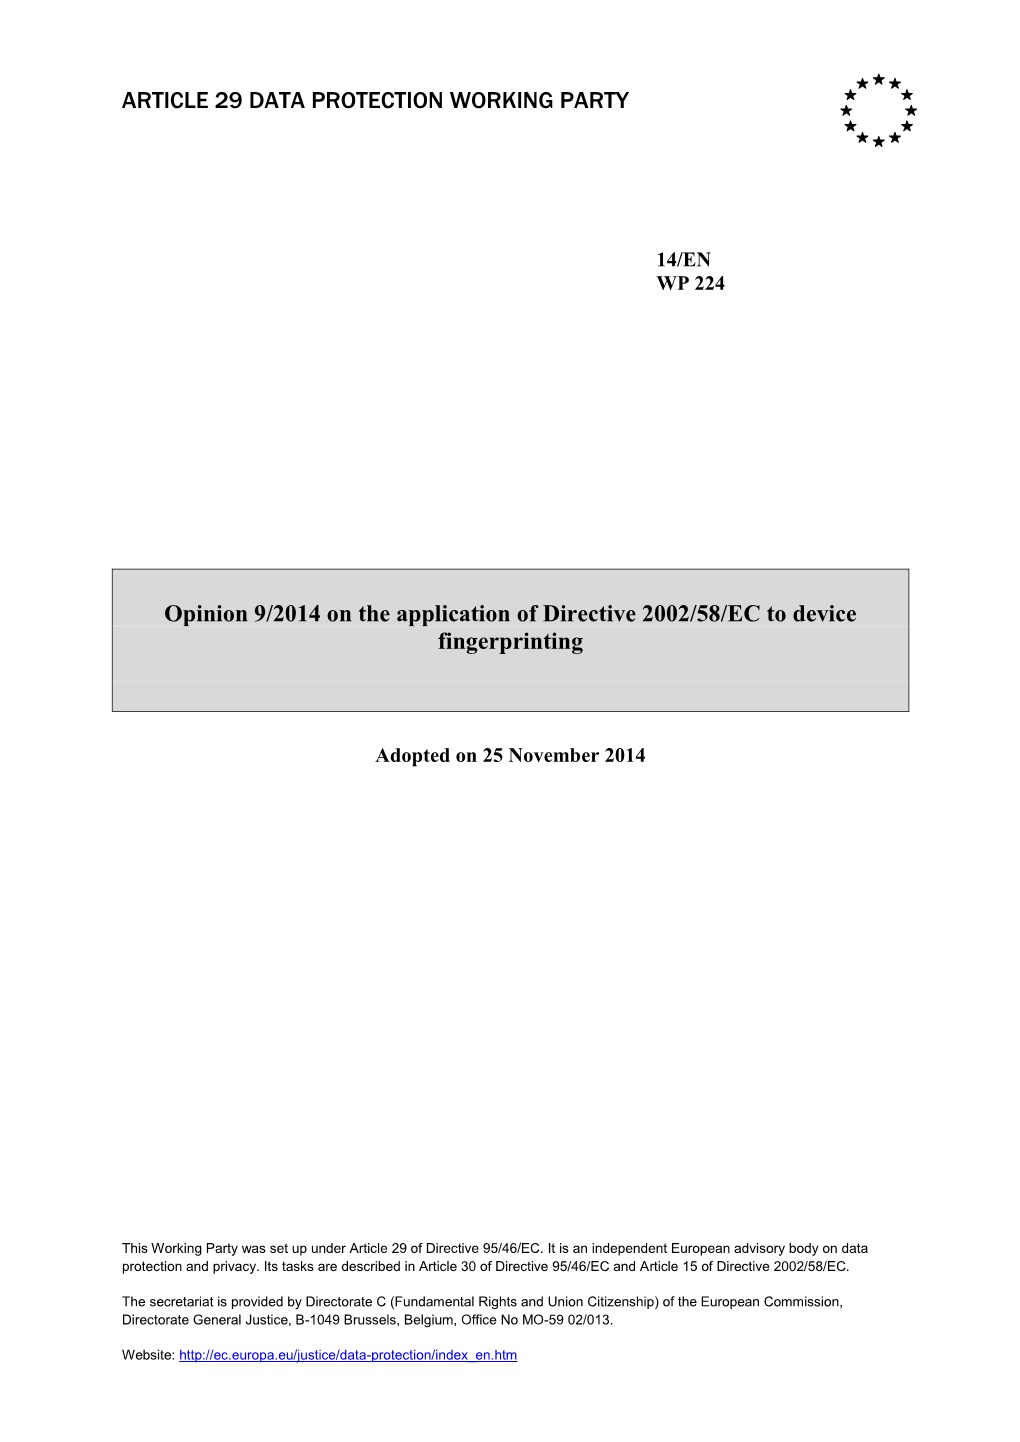 Opinion 9/2014 on the Application of Directive 2002/58/EC to Device Fingerprinting